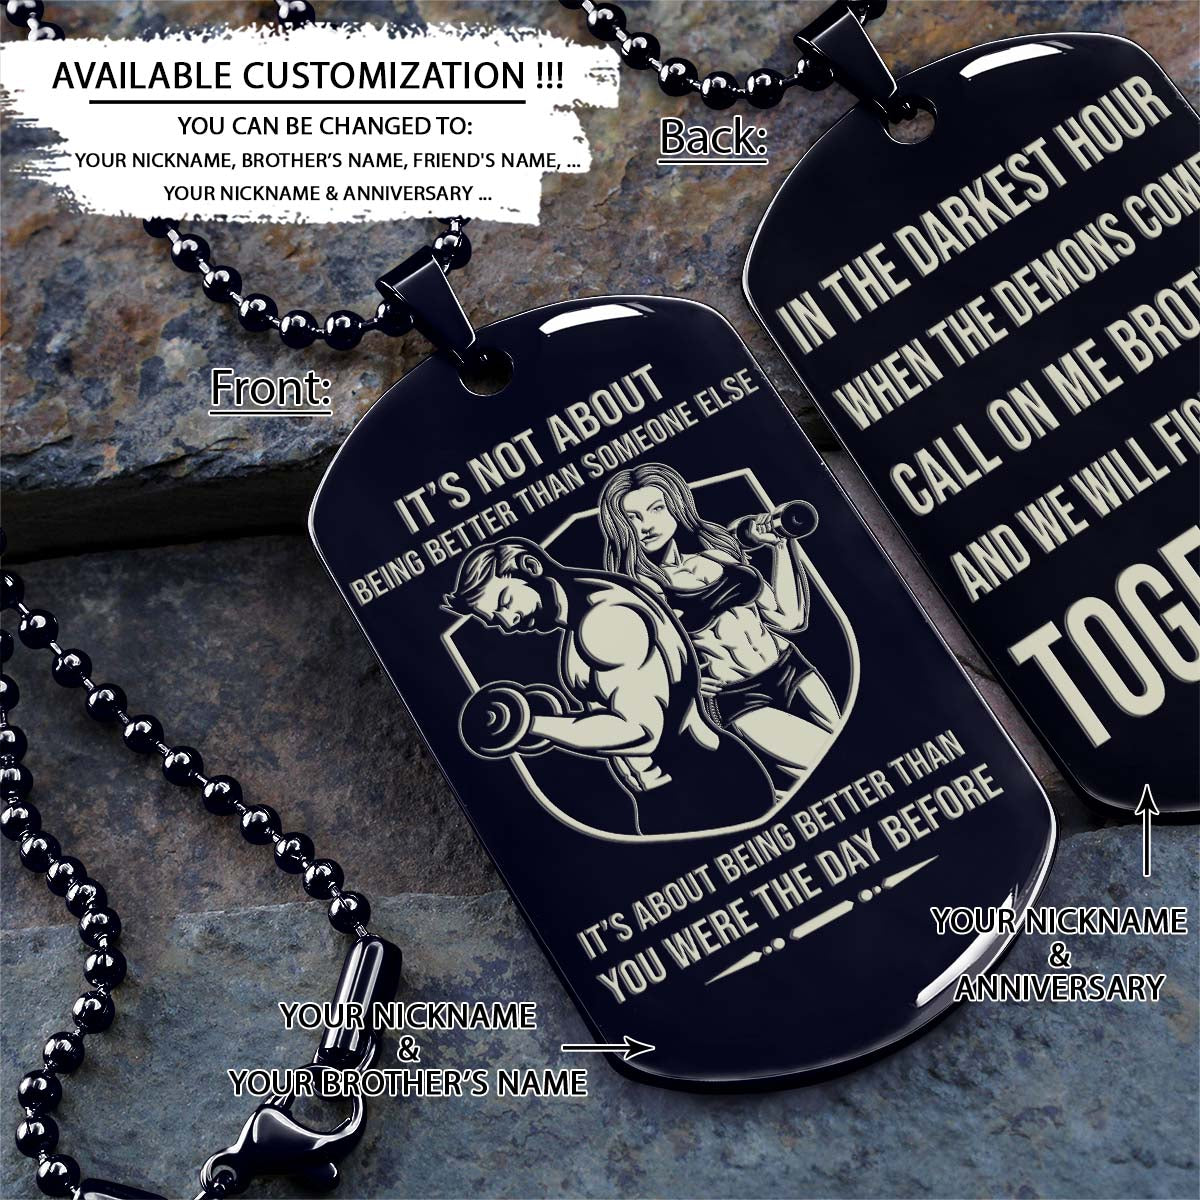 GYMD014 - Call On Me Brother - It's About Being Better Than You Were The Day Before - Gym - Fitness Center - Workout - Gym Dog Tag - Gym Necklace - Black Engrave Dog Tag